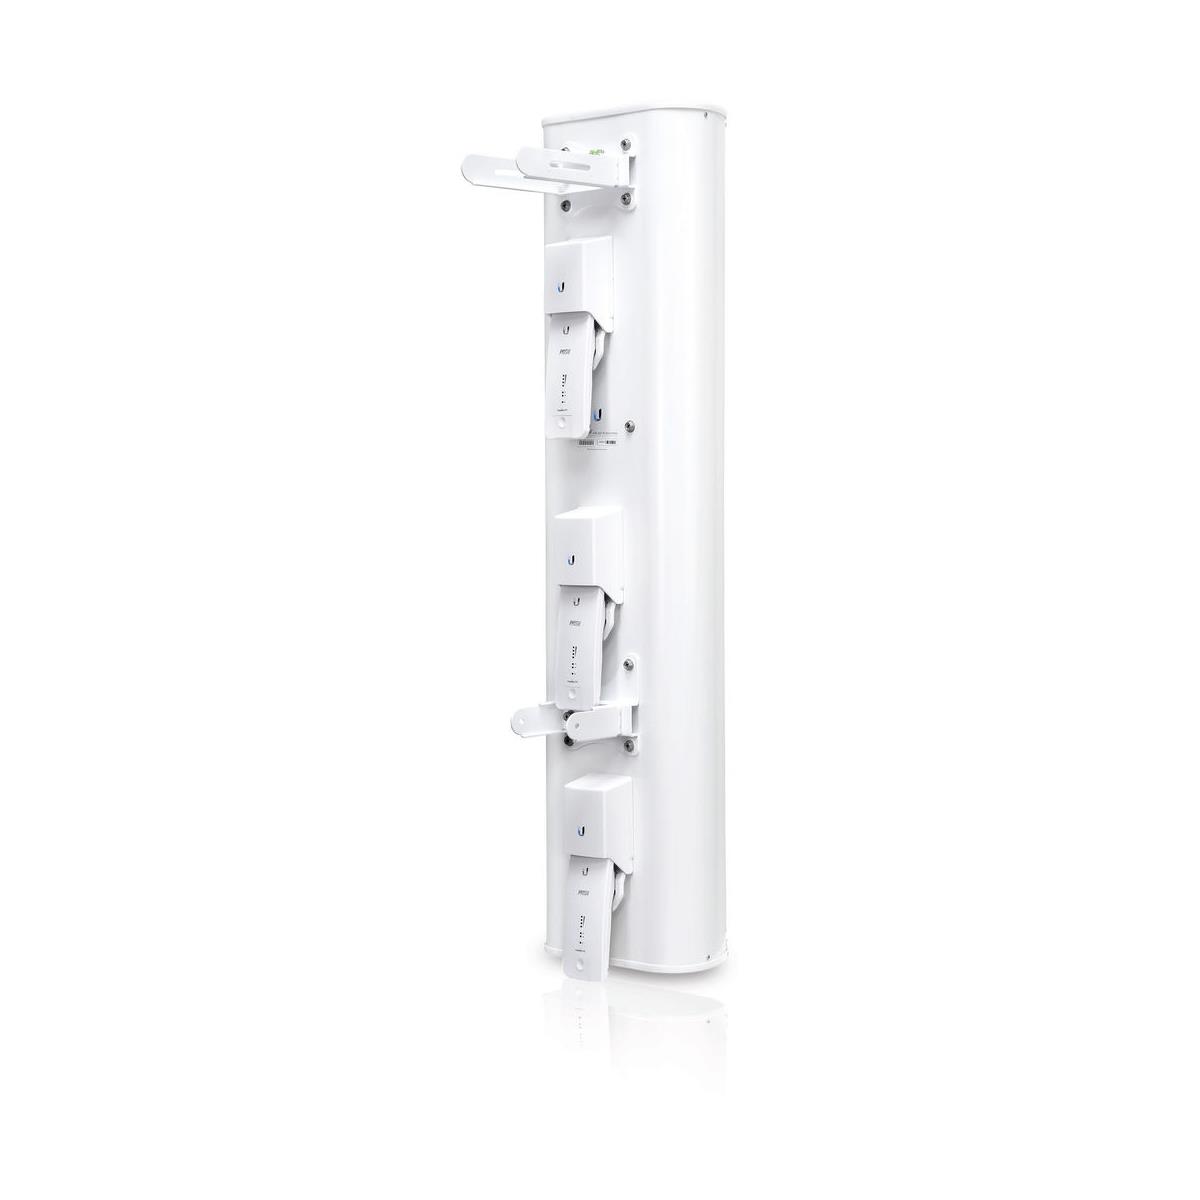 Image of Ubiquiti Networks airPRISM 3x30 Degree HD Sector Antenna